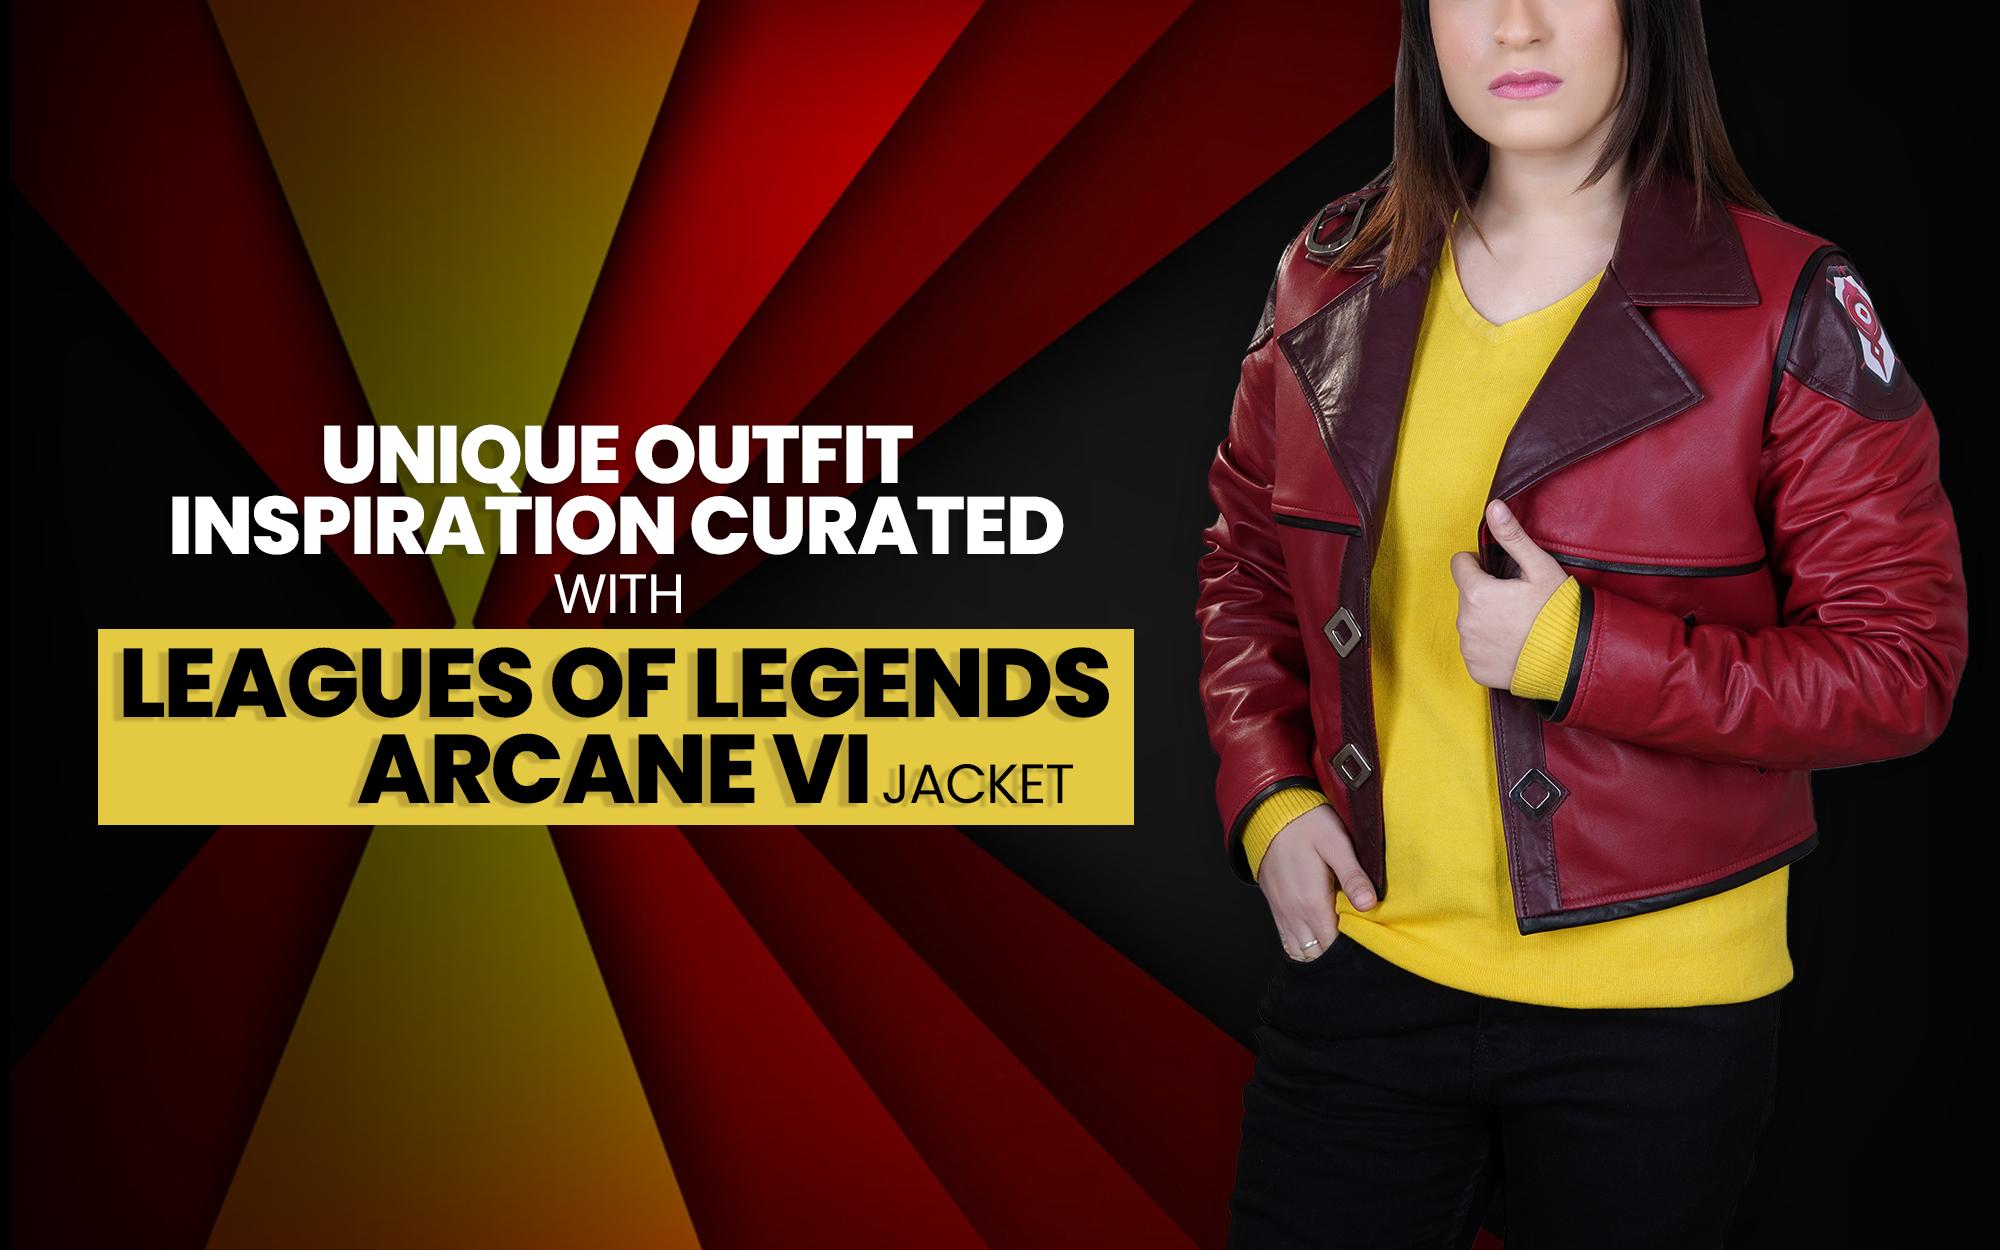 Unique Outfit Inspiration Curated with Leagues Of Legends Arcane VI Jacket